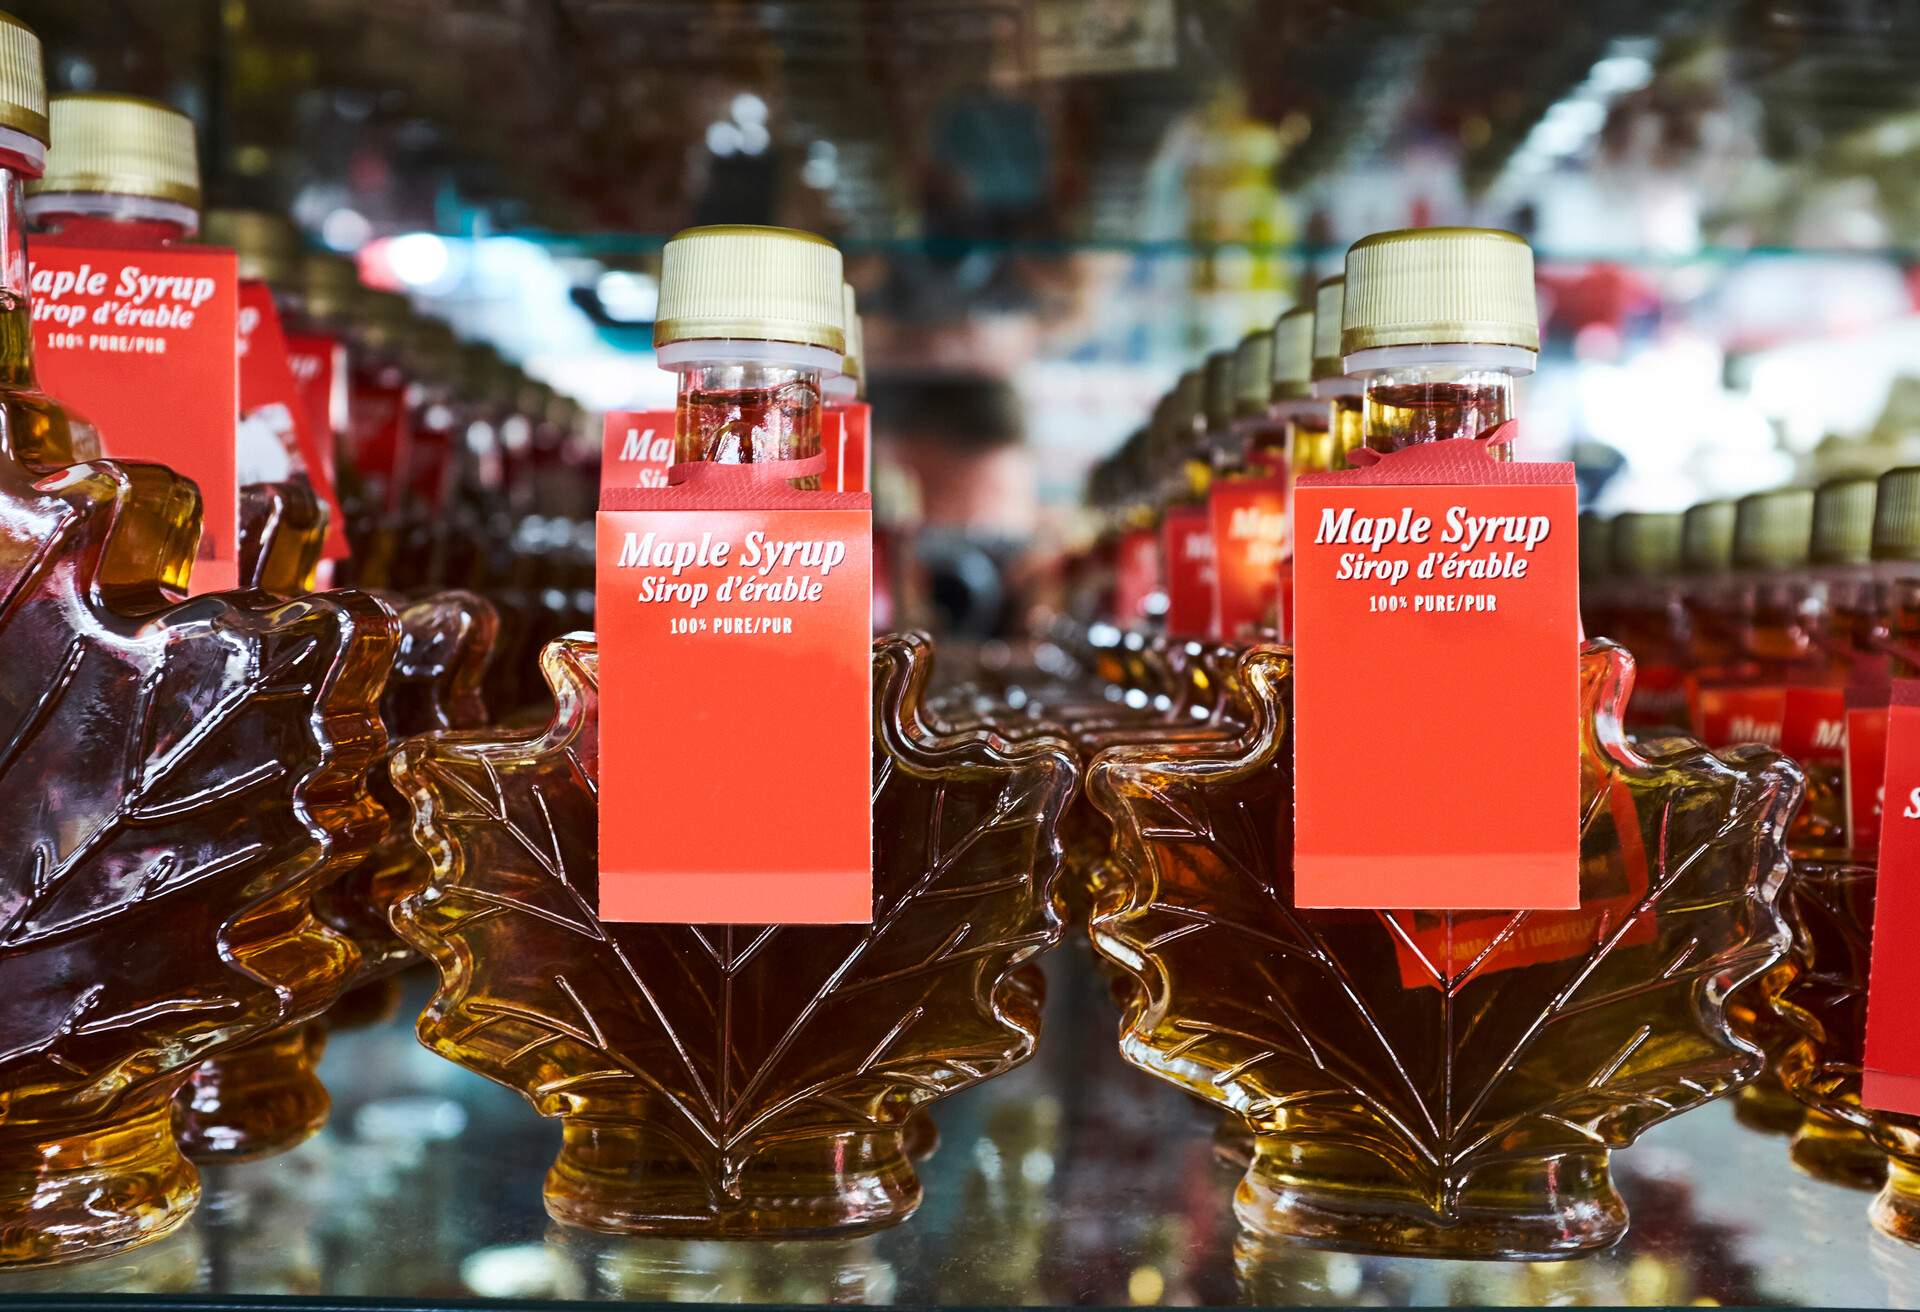 THEME_FOOD_CANADIAN_MAPLE-SYRUP_SOUVENIR_GettyImages-702549371